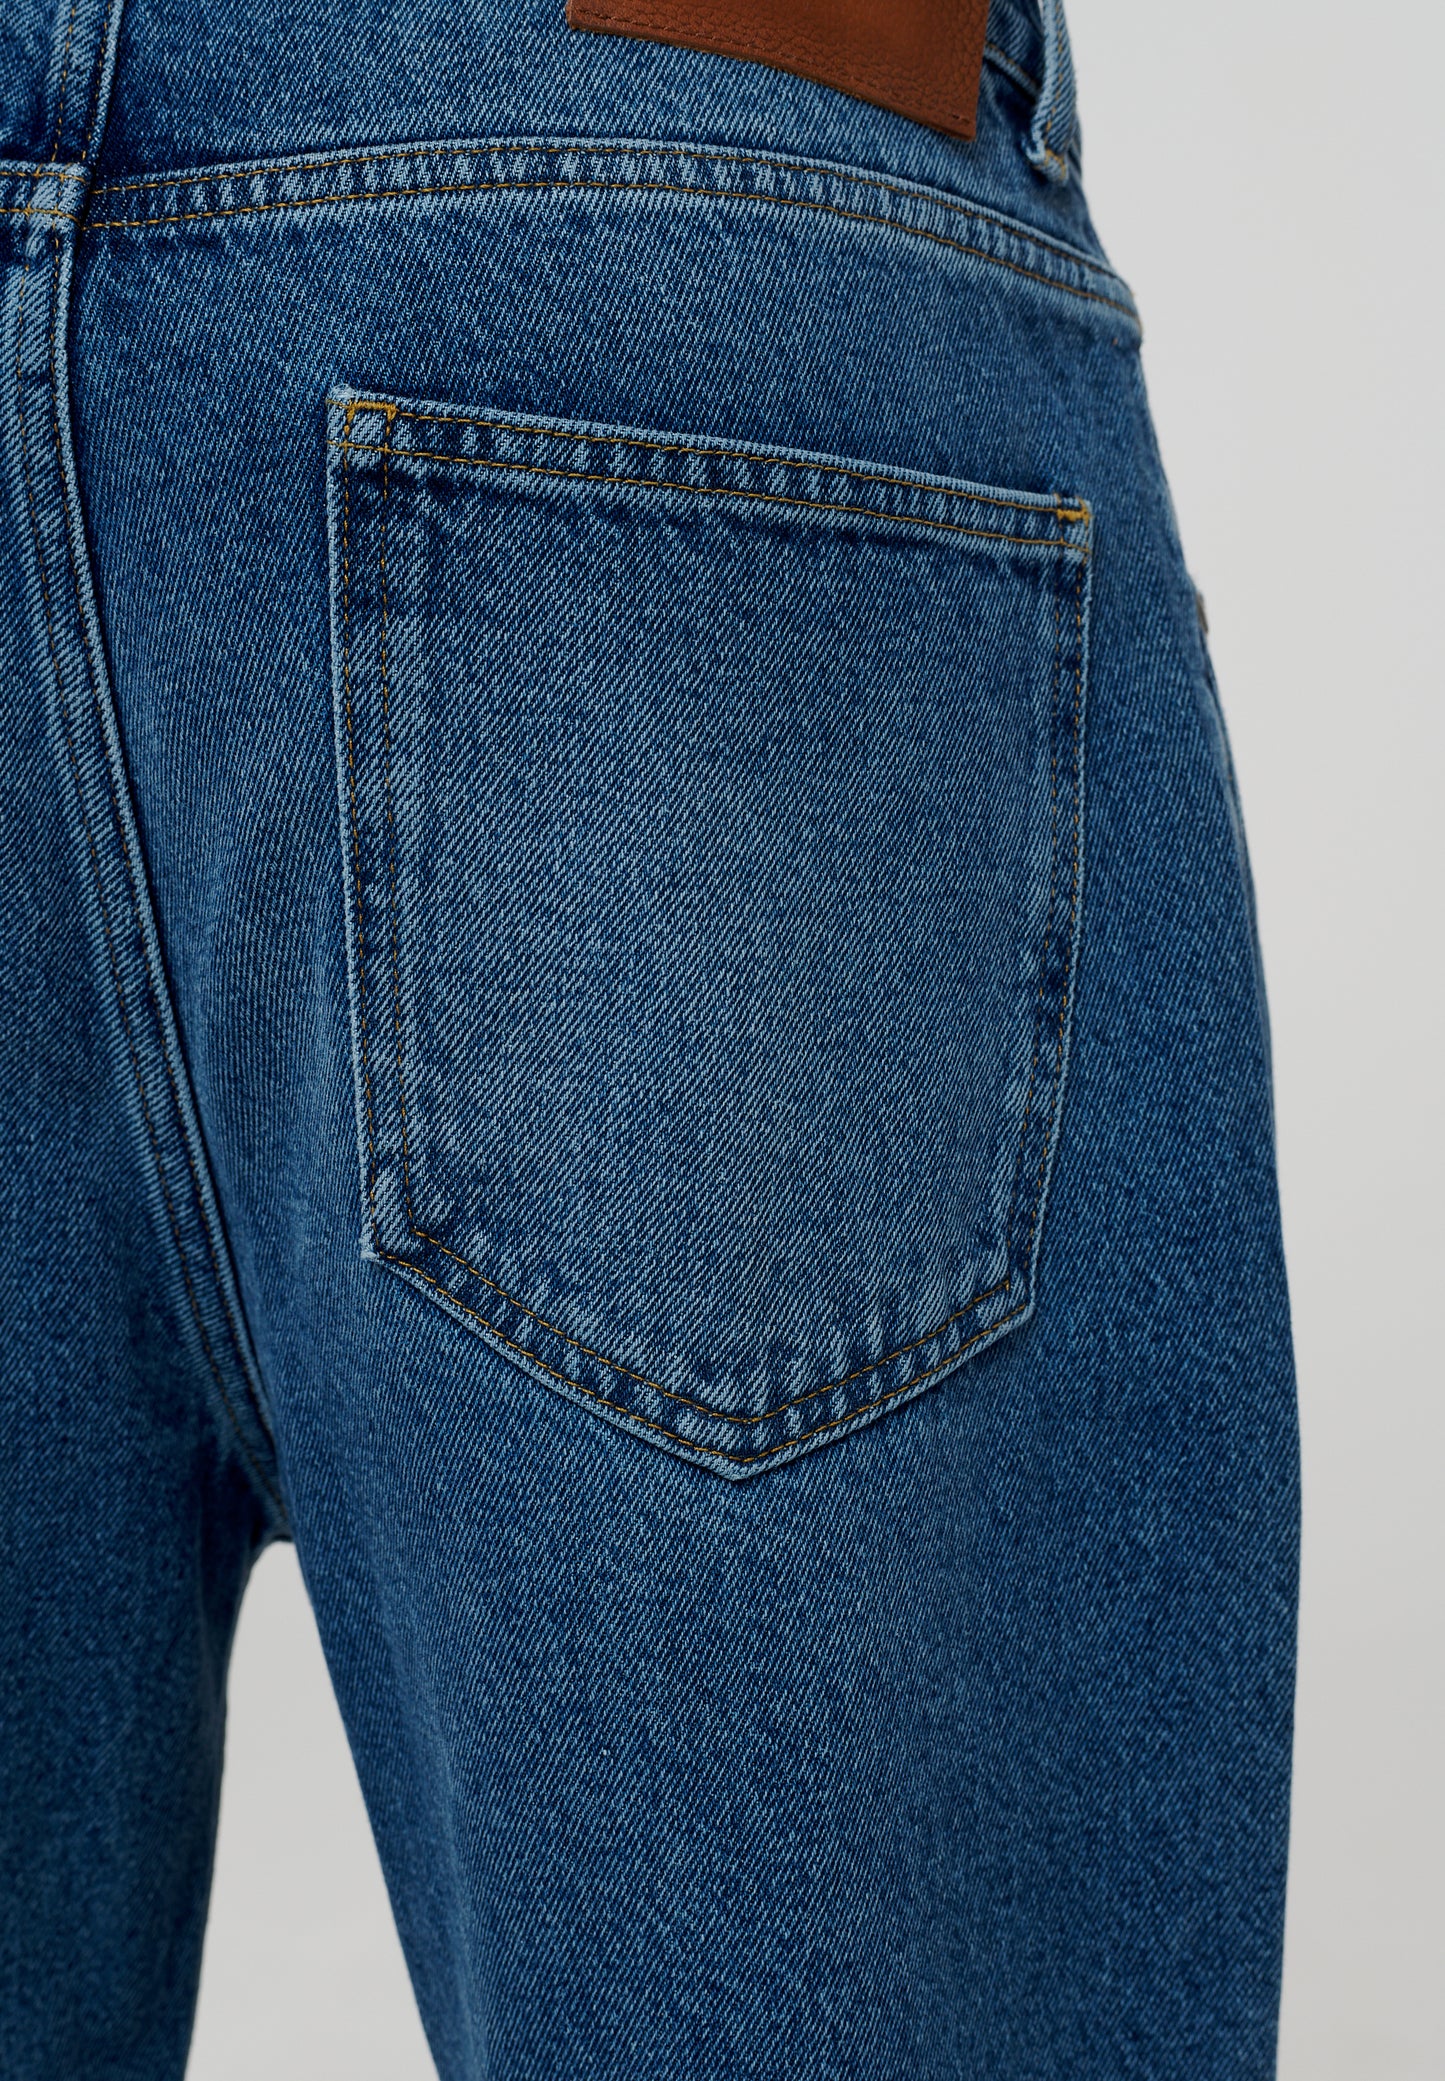 Destroyed Baggy Jeans 2YBGY0001 Blue